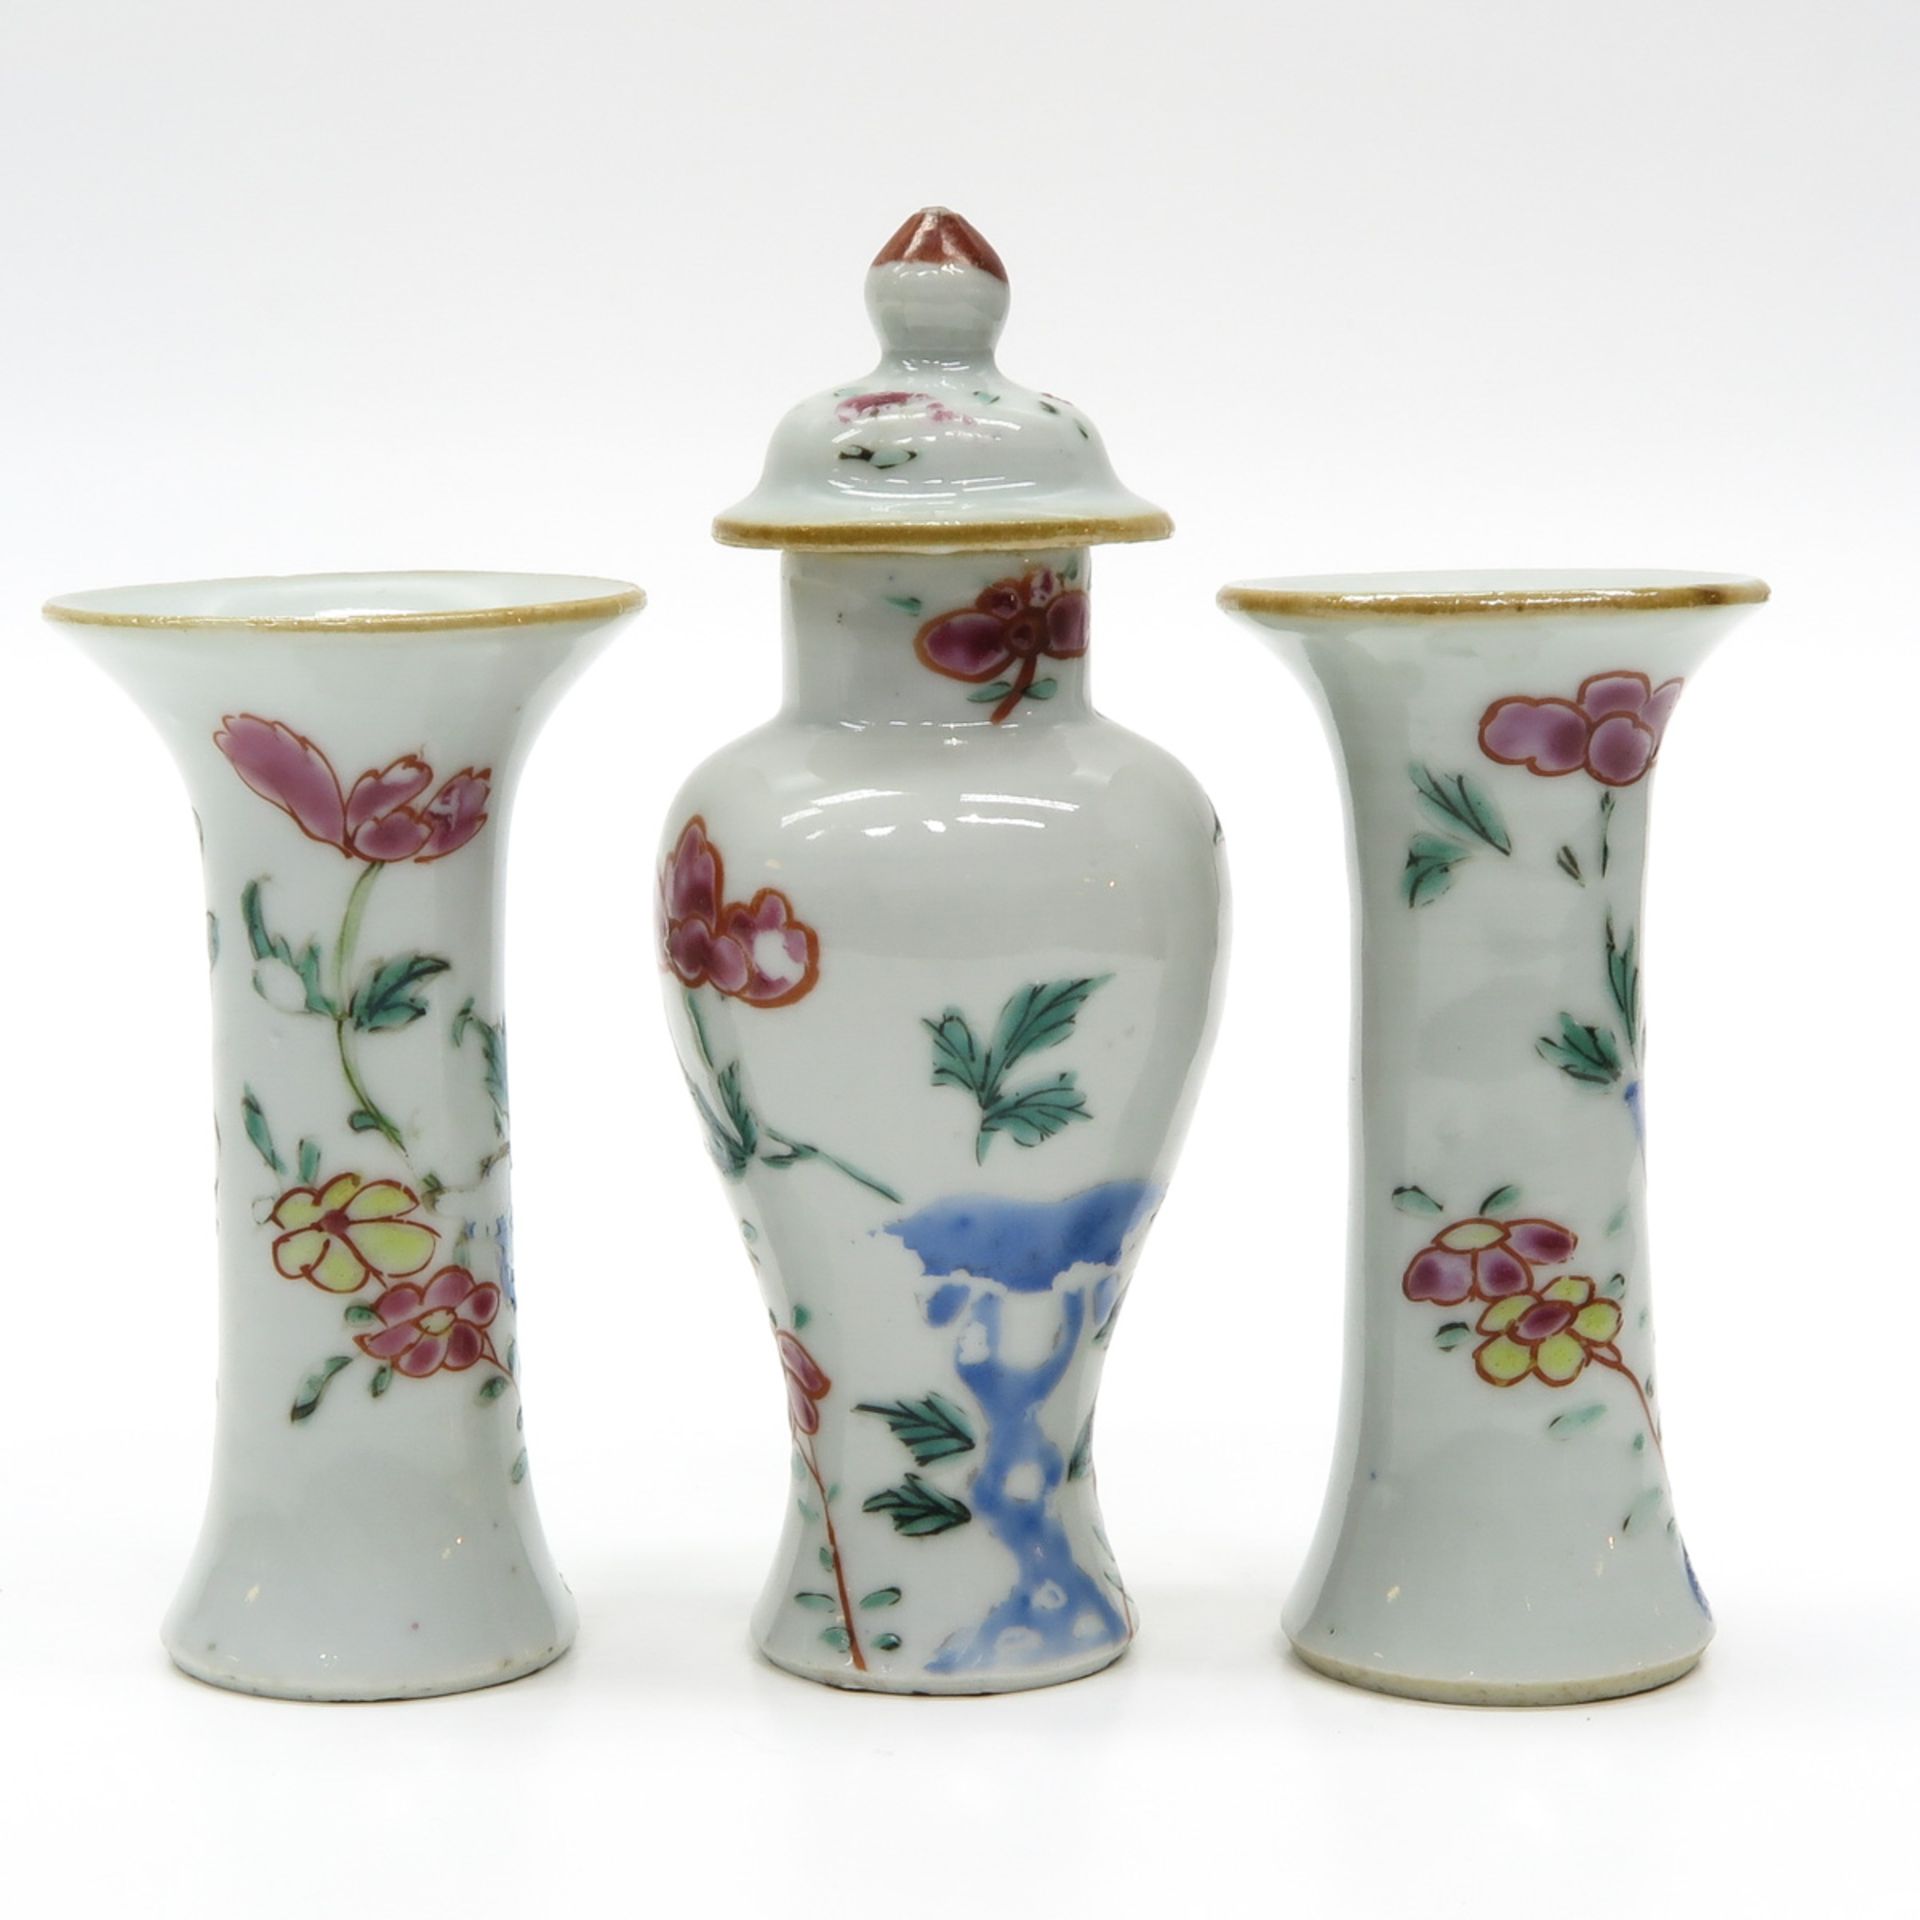 Lot of 3 Miniature Vases - Image 4 of 6